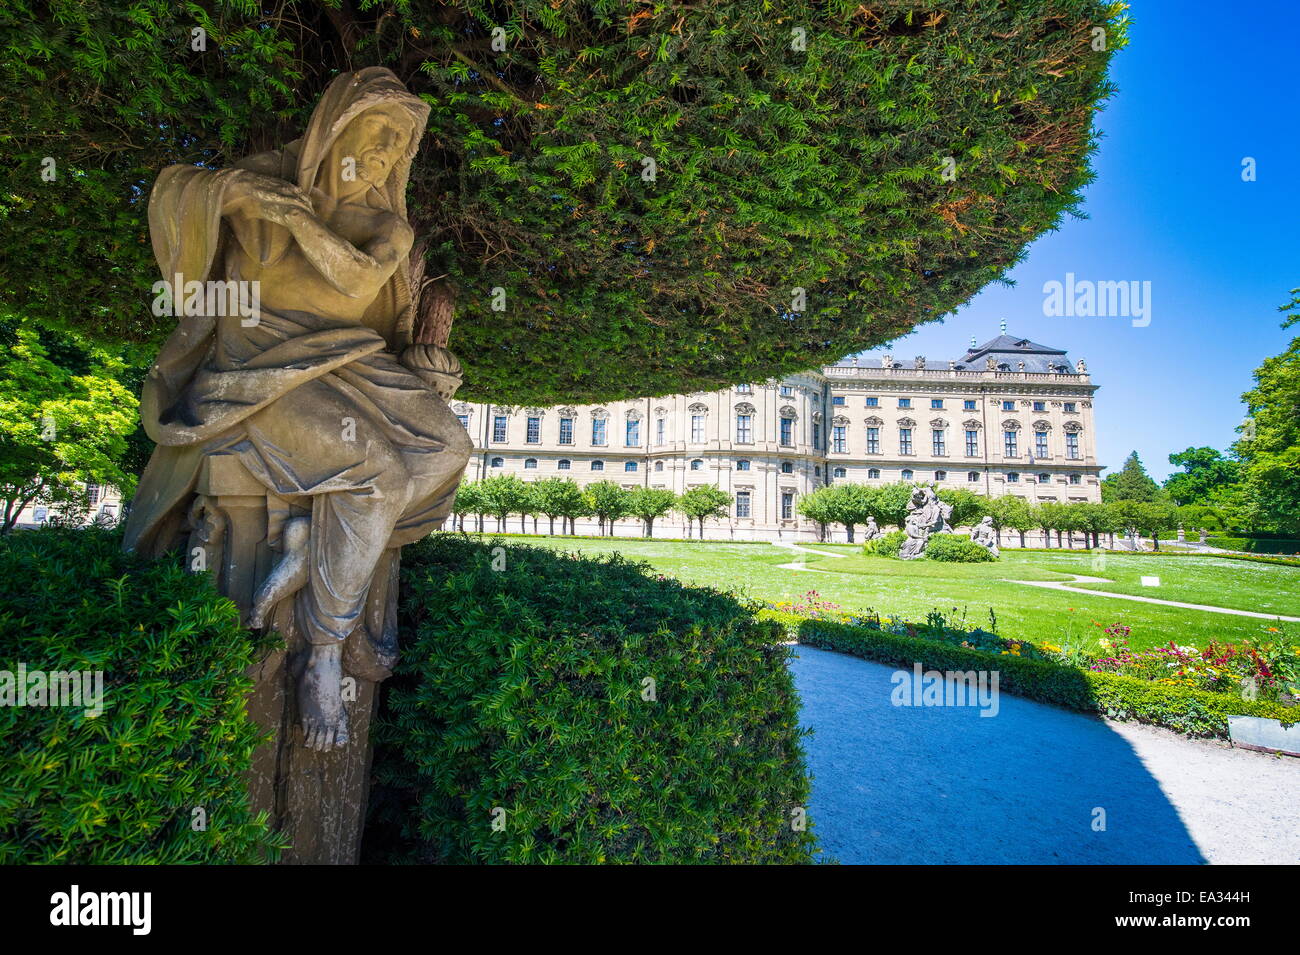 Statue under a tree in the Baroque gardens in the Wurzburg Residence, UNESCO Site, Wurzburg, Franconia, Bavaria, Germany Stock Photo